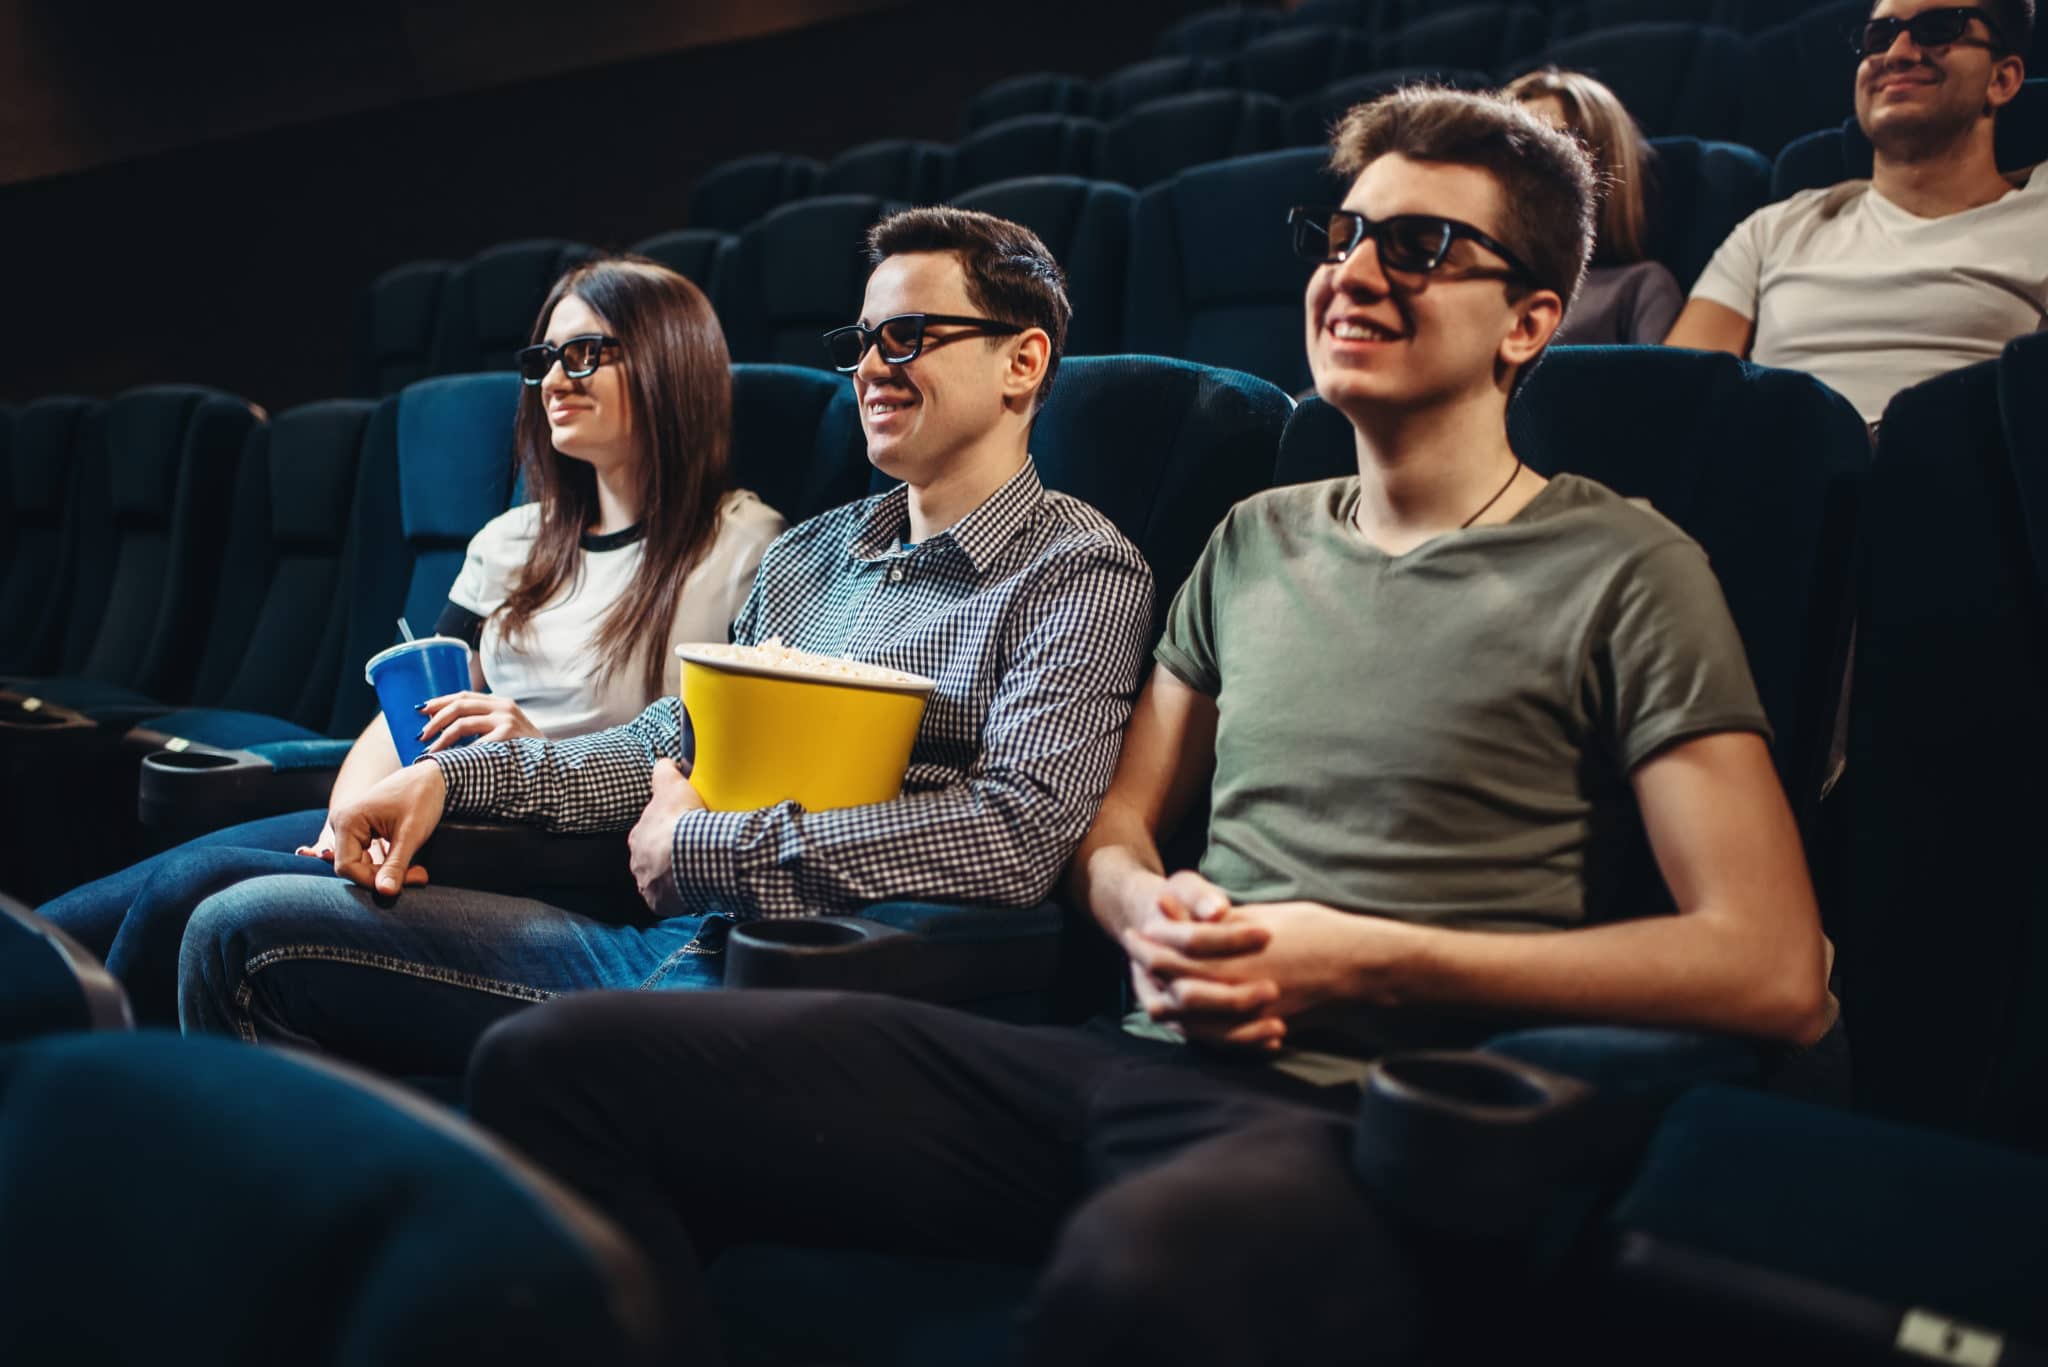 3 young people watching movie with popcorn wearing 3d glasses in a theater like AMC.